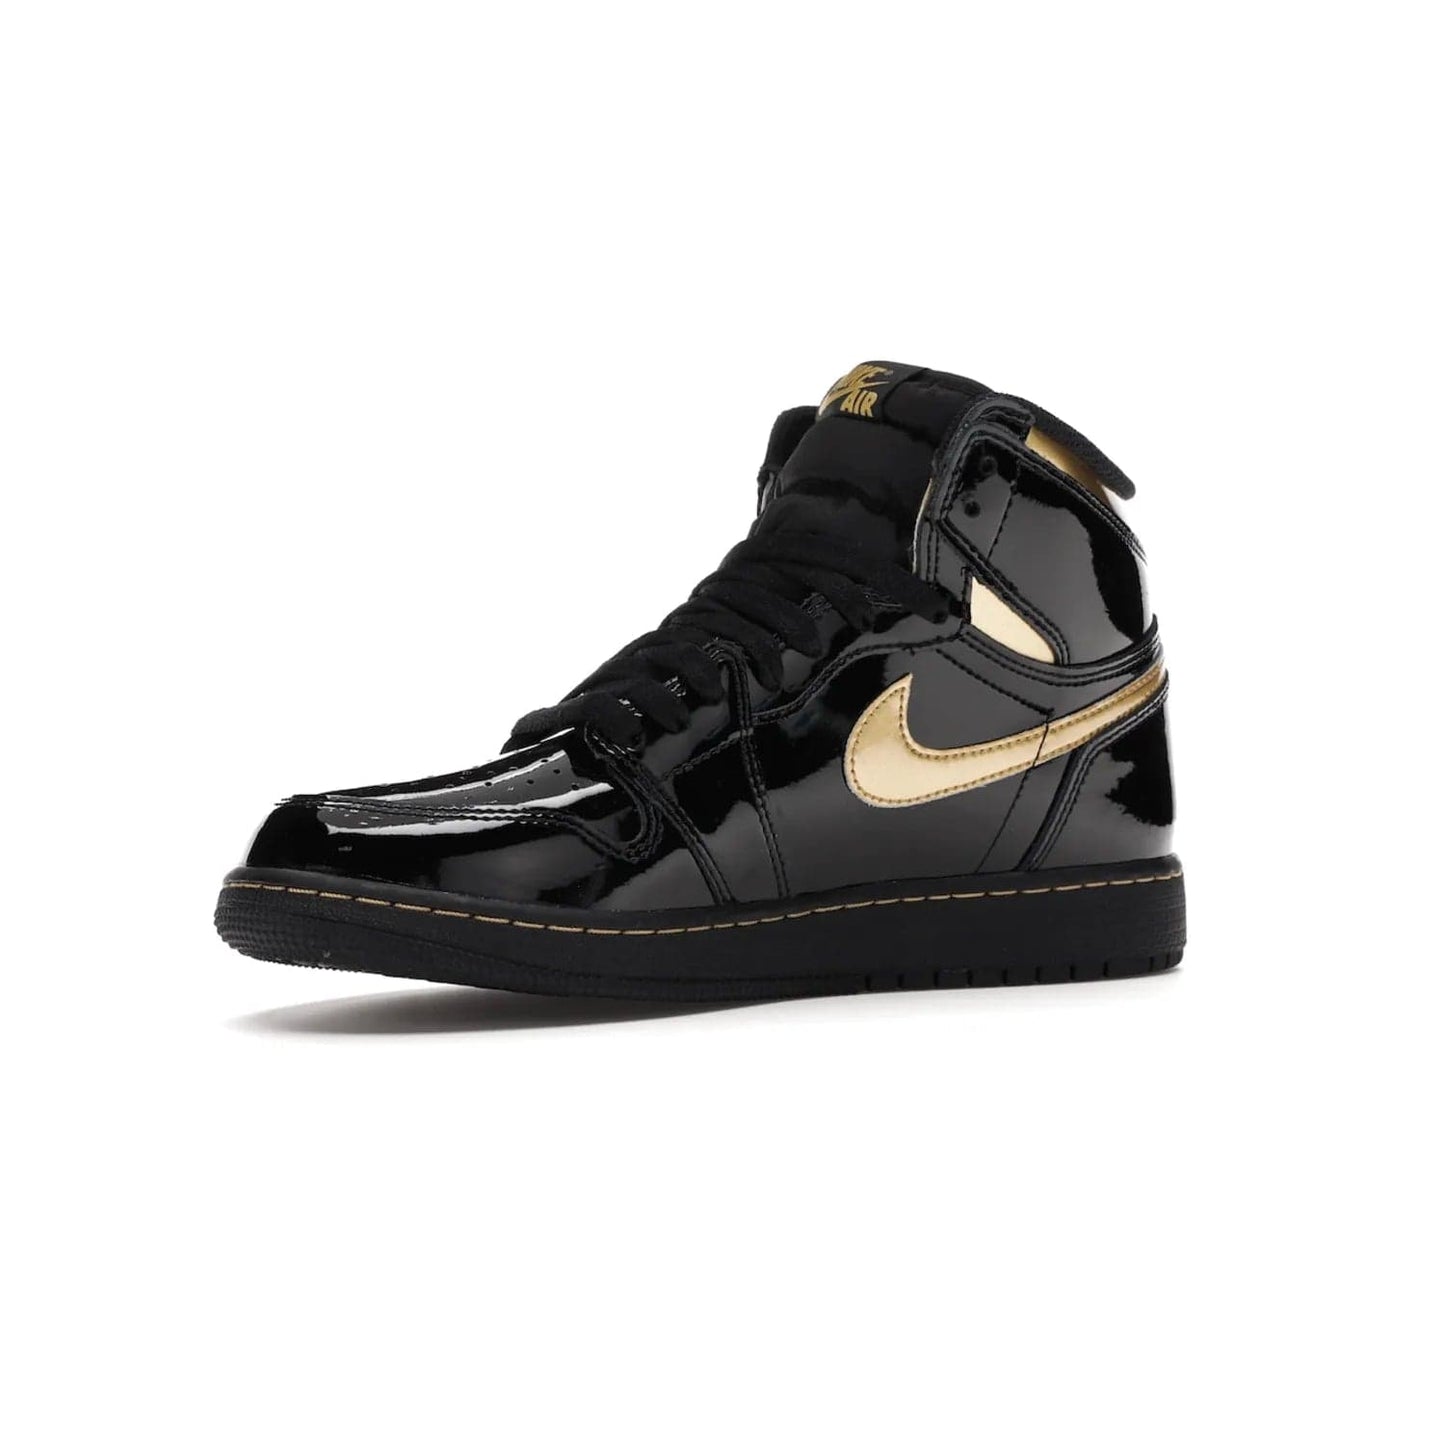 Jordan 1 Retro High Black Metallic Gold (2020) (GS) - Image 16 - Only at www.BallersClubKickz.com - Shop the Kids Air Jordan 1 Retro High in Black Metallic Gold for a stylish and comfortable sneaker kids can love. Featuring black and metallic gold patent leather uppers, metallic gold accents, and an Air sole unit for extra cushioning.